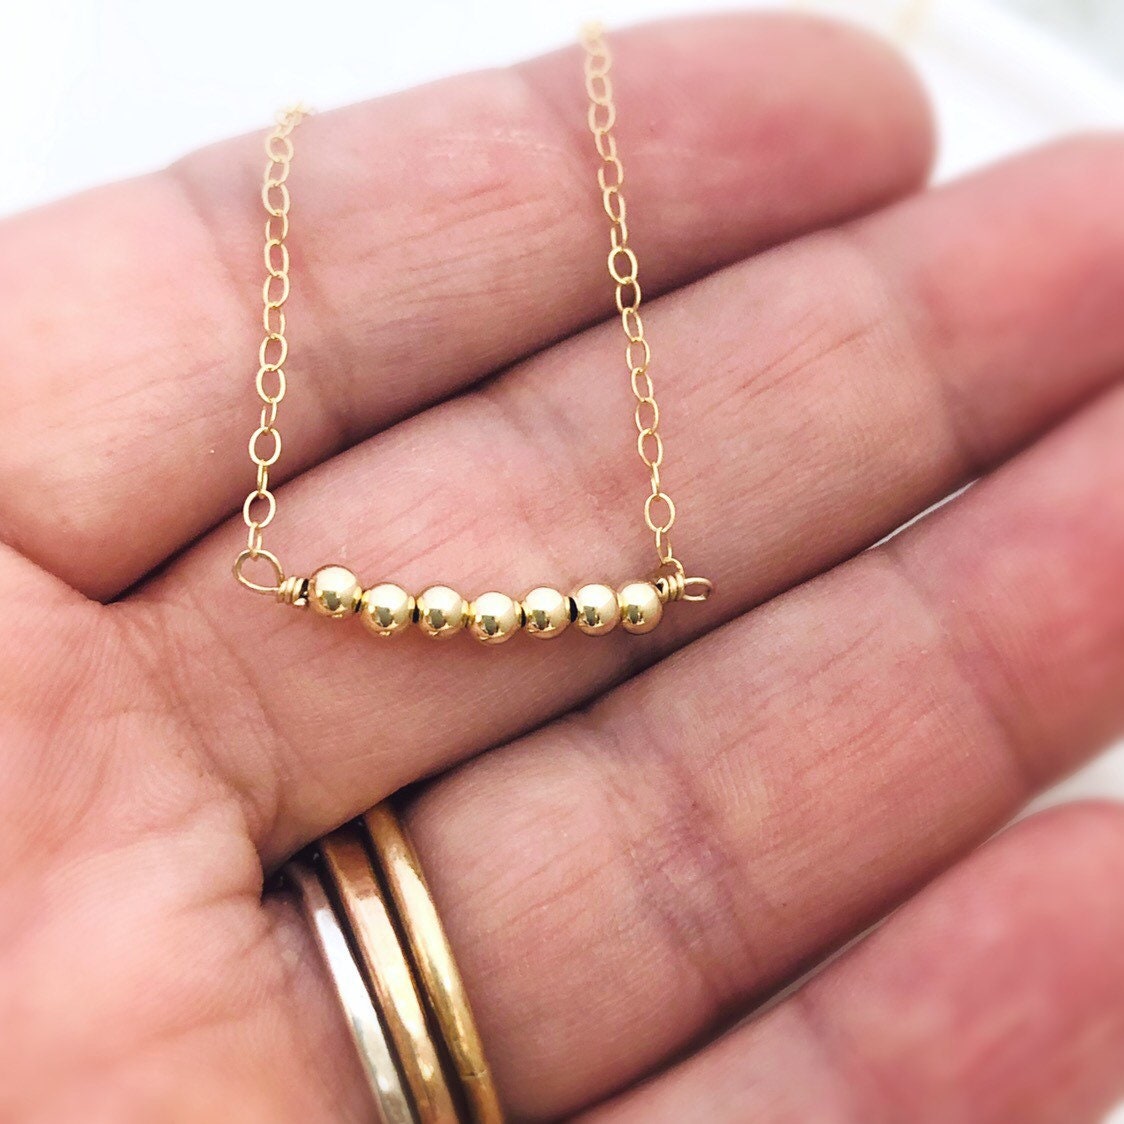 Gold Necklace with Sterling Silver Beads; Minimal Gold Necklace; Dainty Gold Necklace; Delicate Layering Gold Necklace;